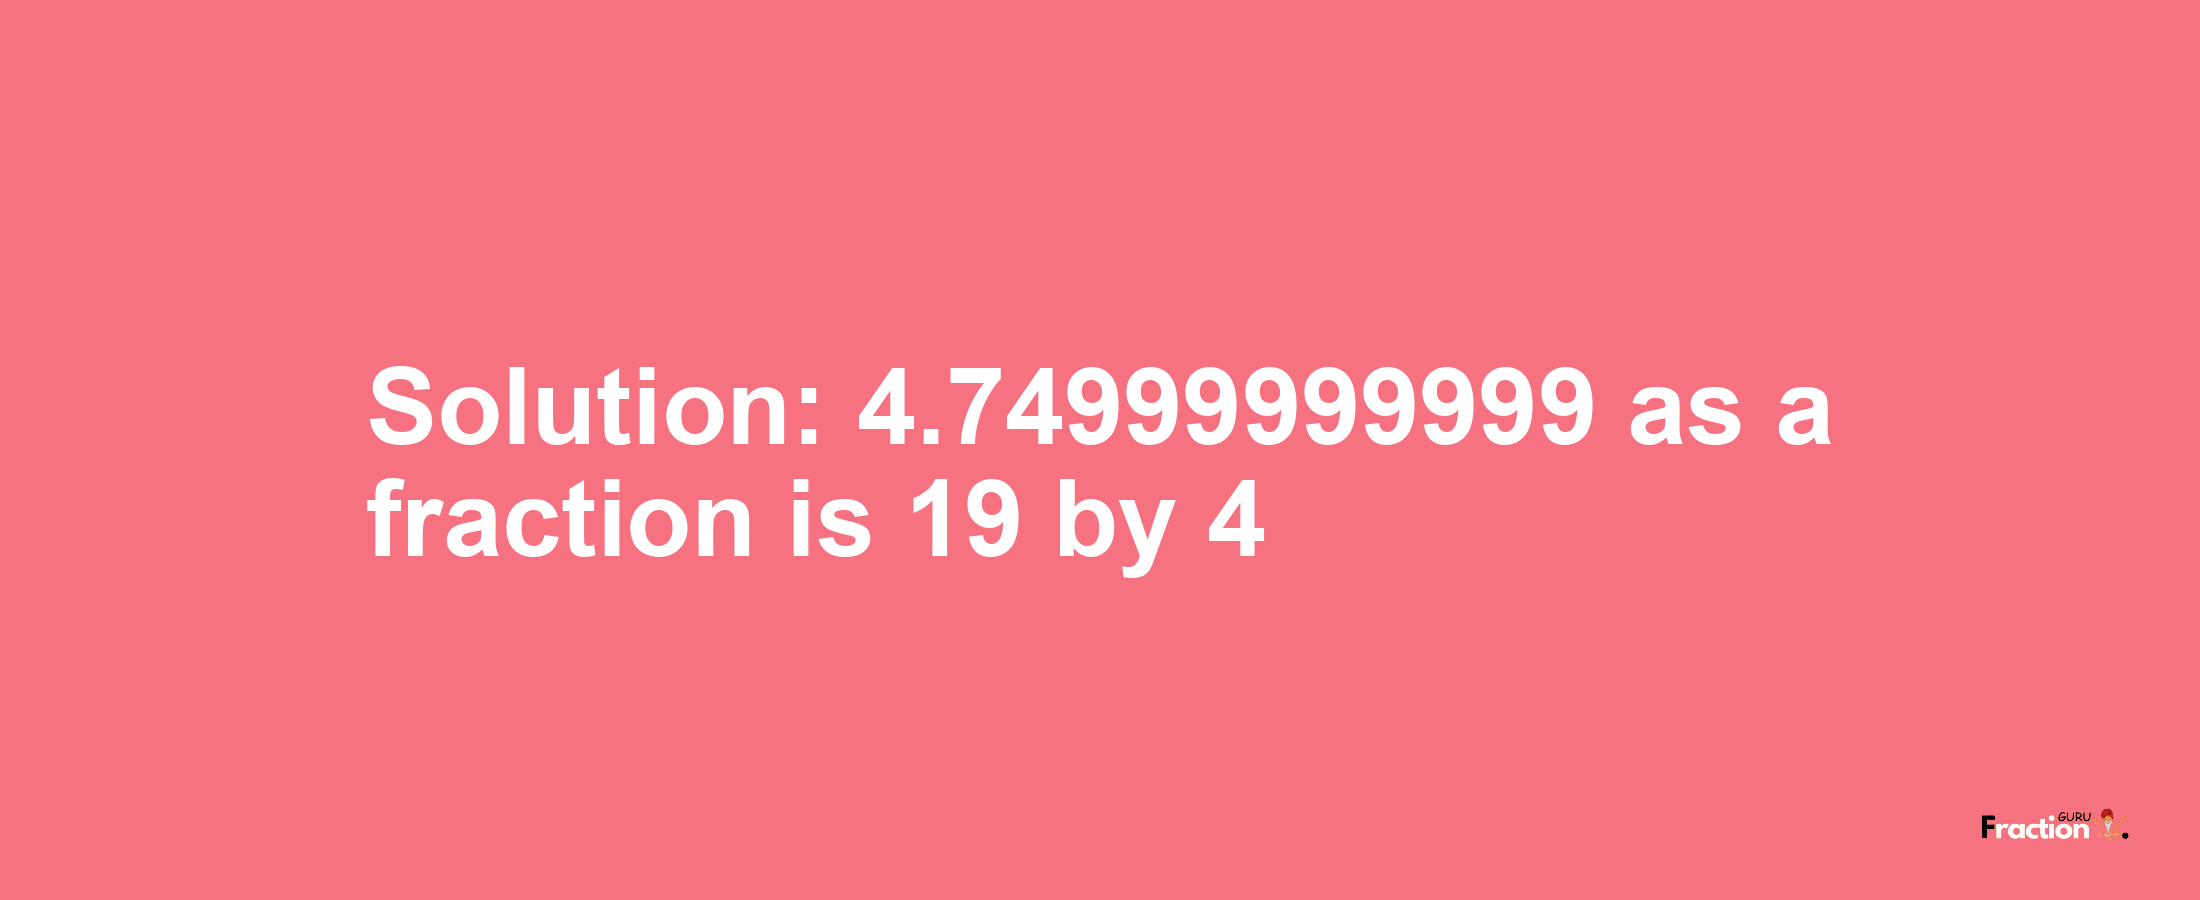 Solution:4.74999999999 as a fraction is 19/4